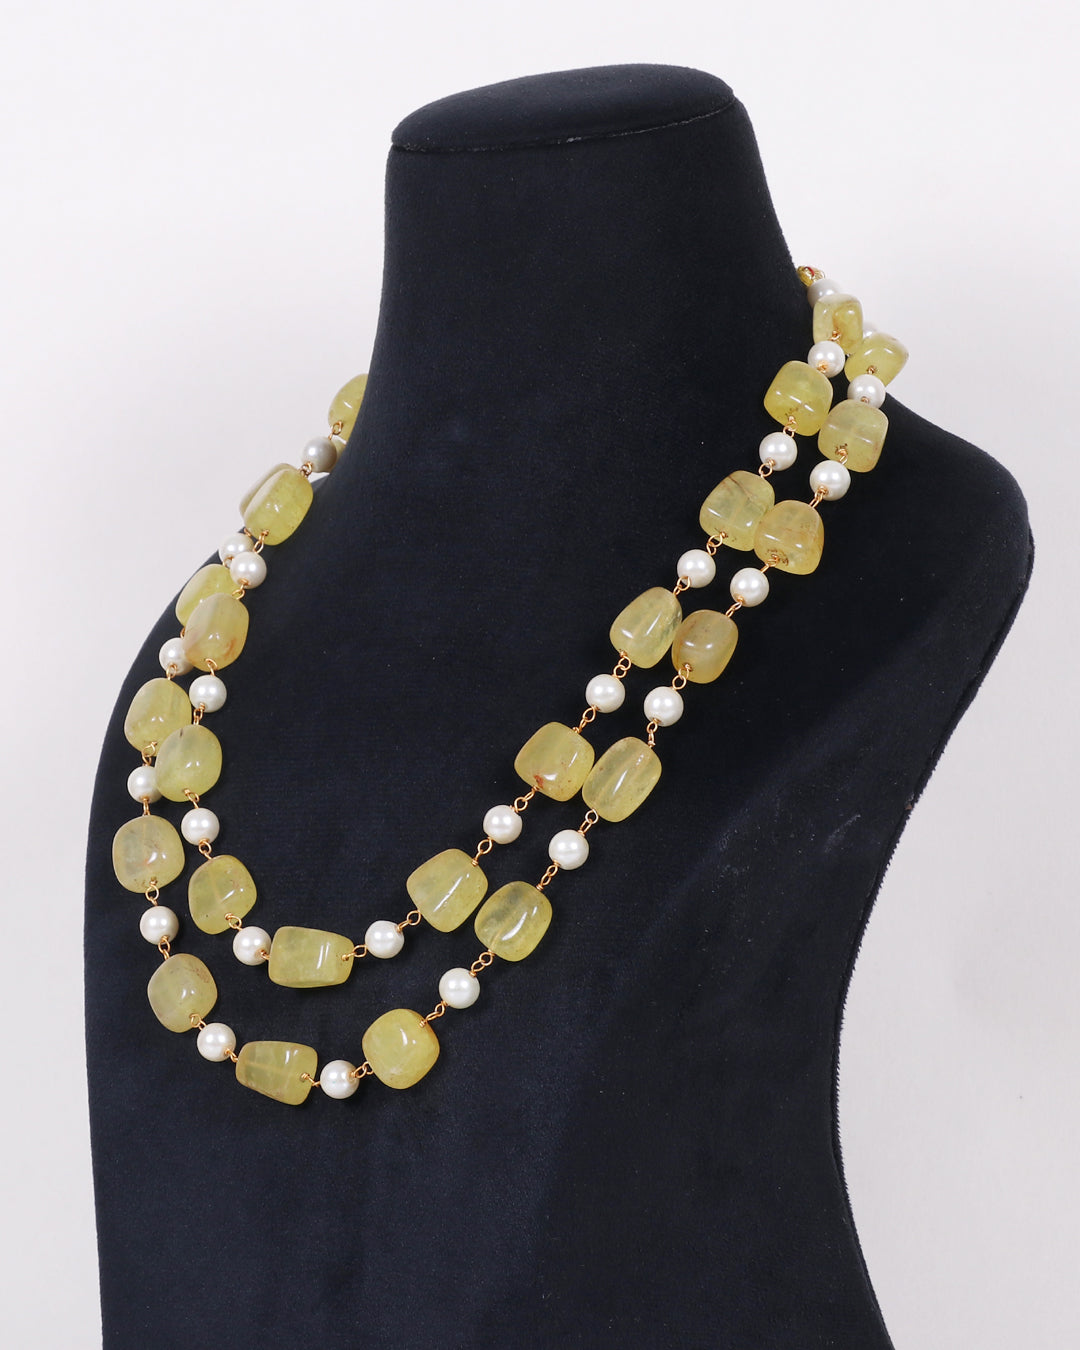 Natural Yellow Quartz & Pearl Gemstone Beads Necklace Jewelry